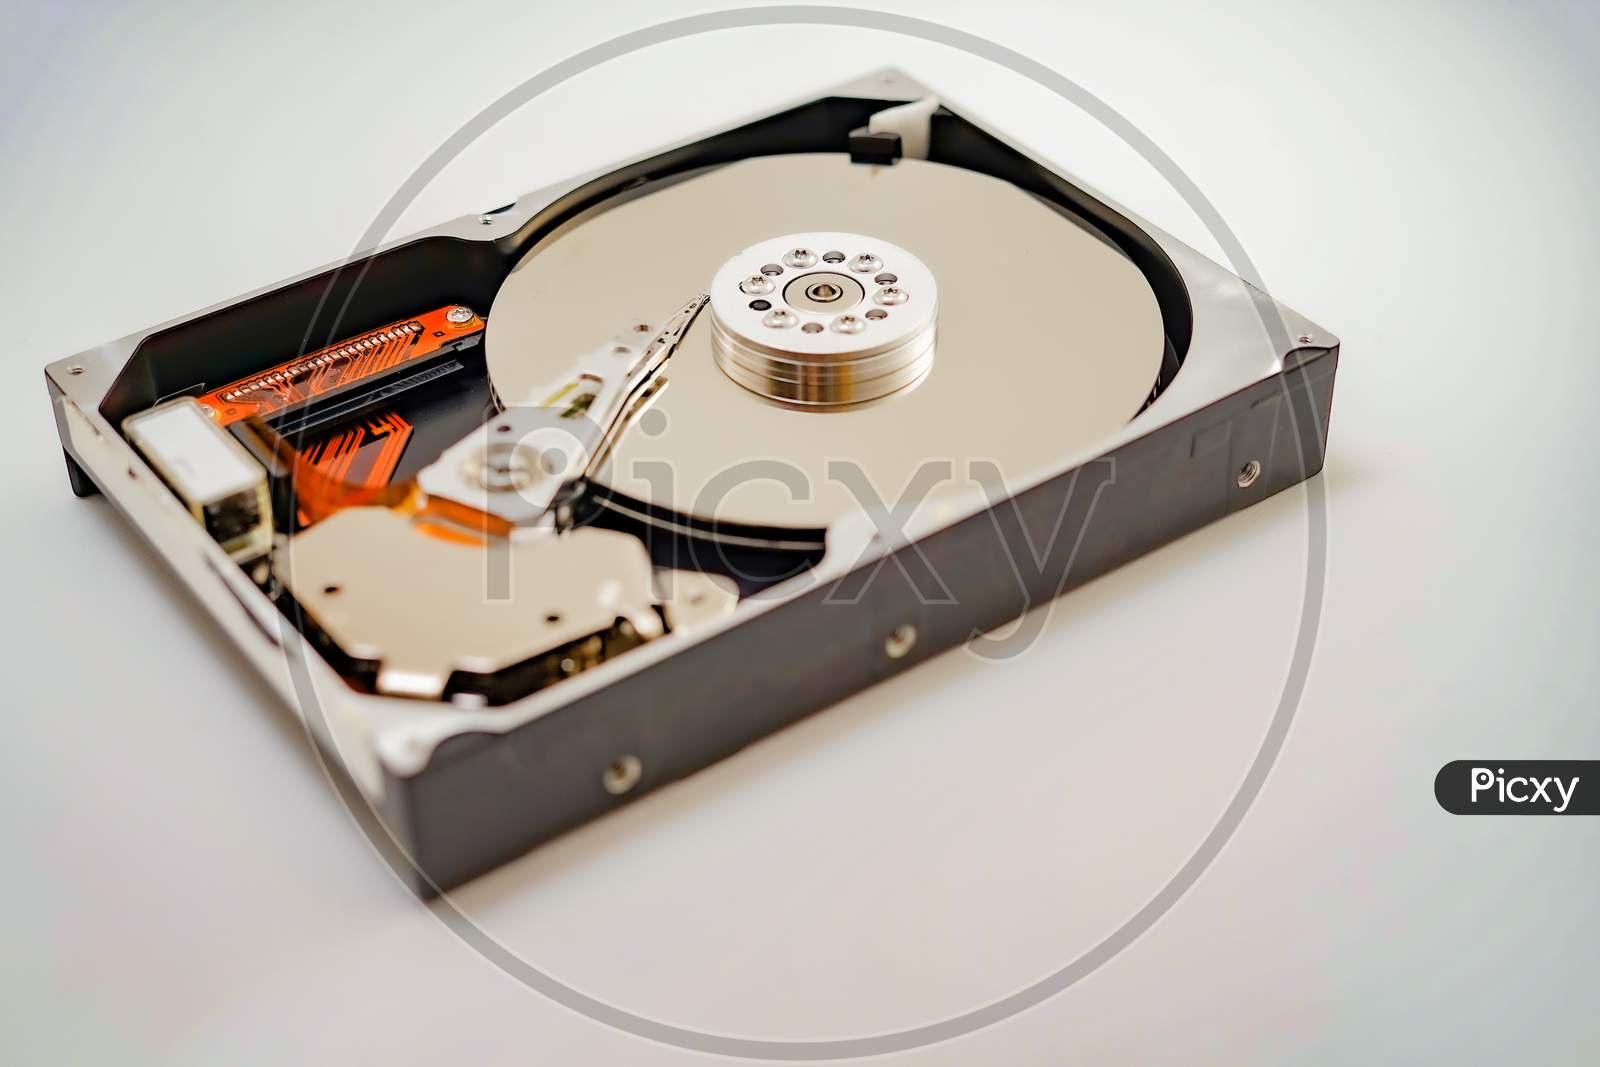 Image Of The Decomposed Hard Disk Drive